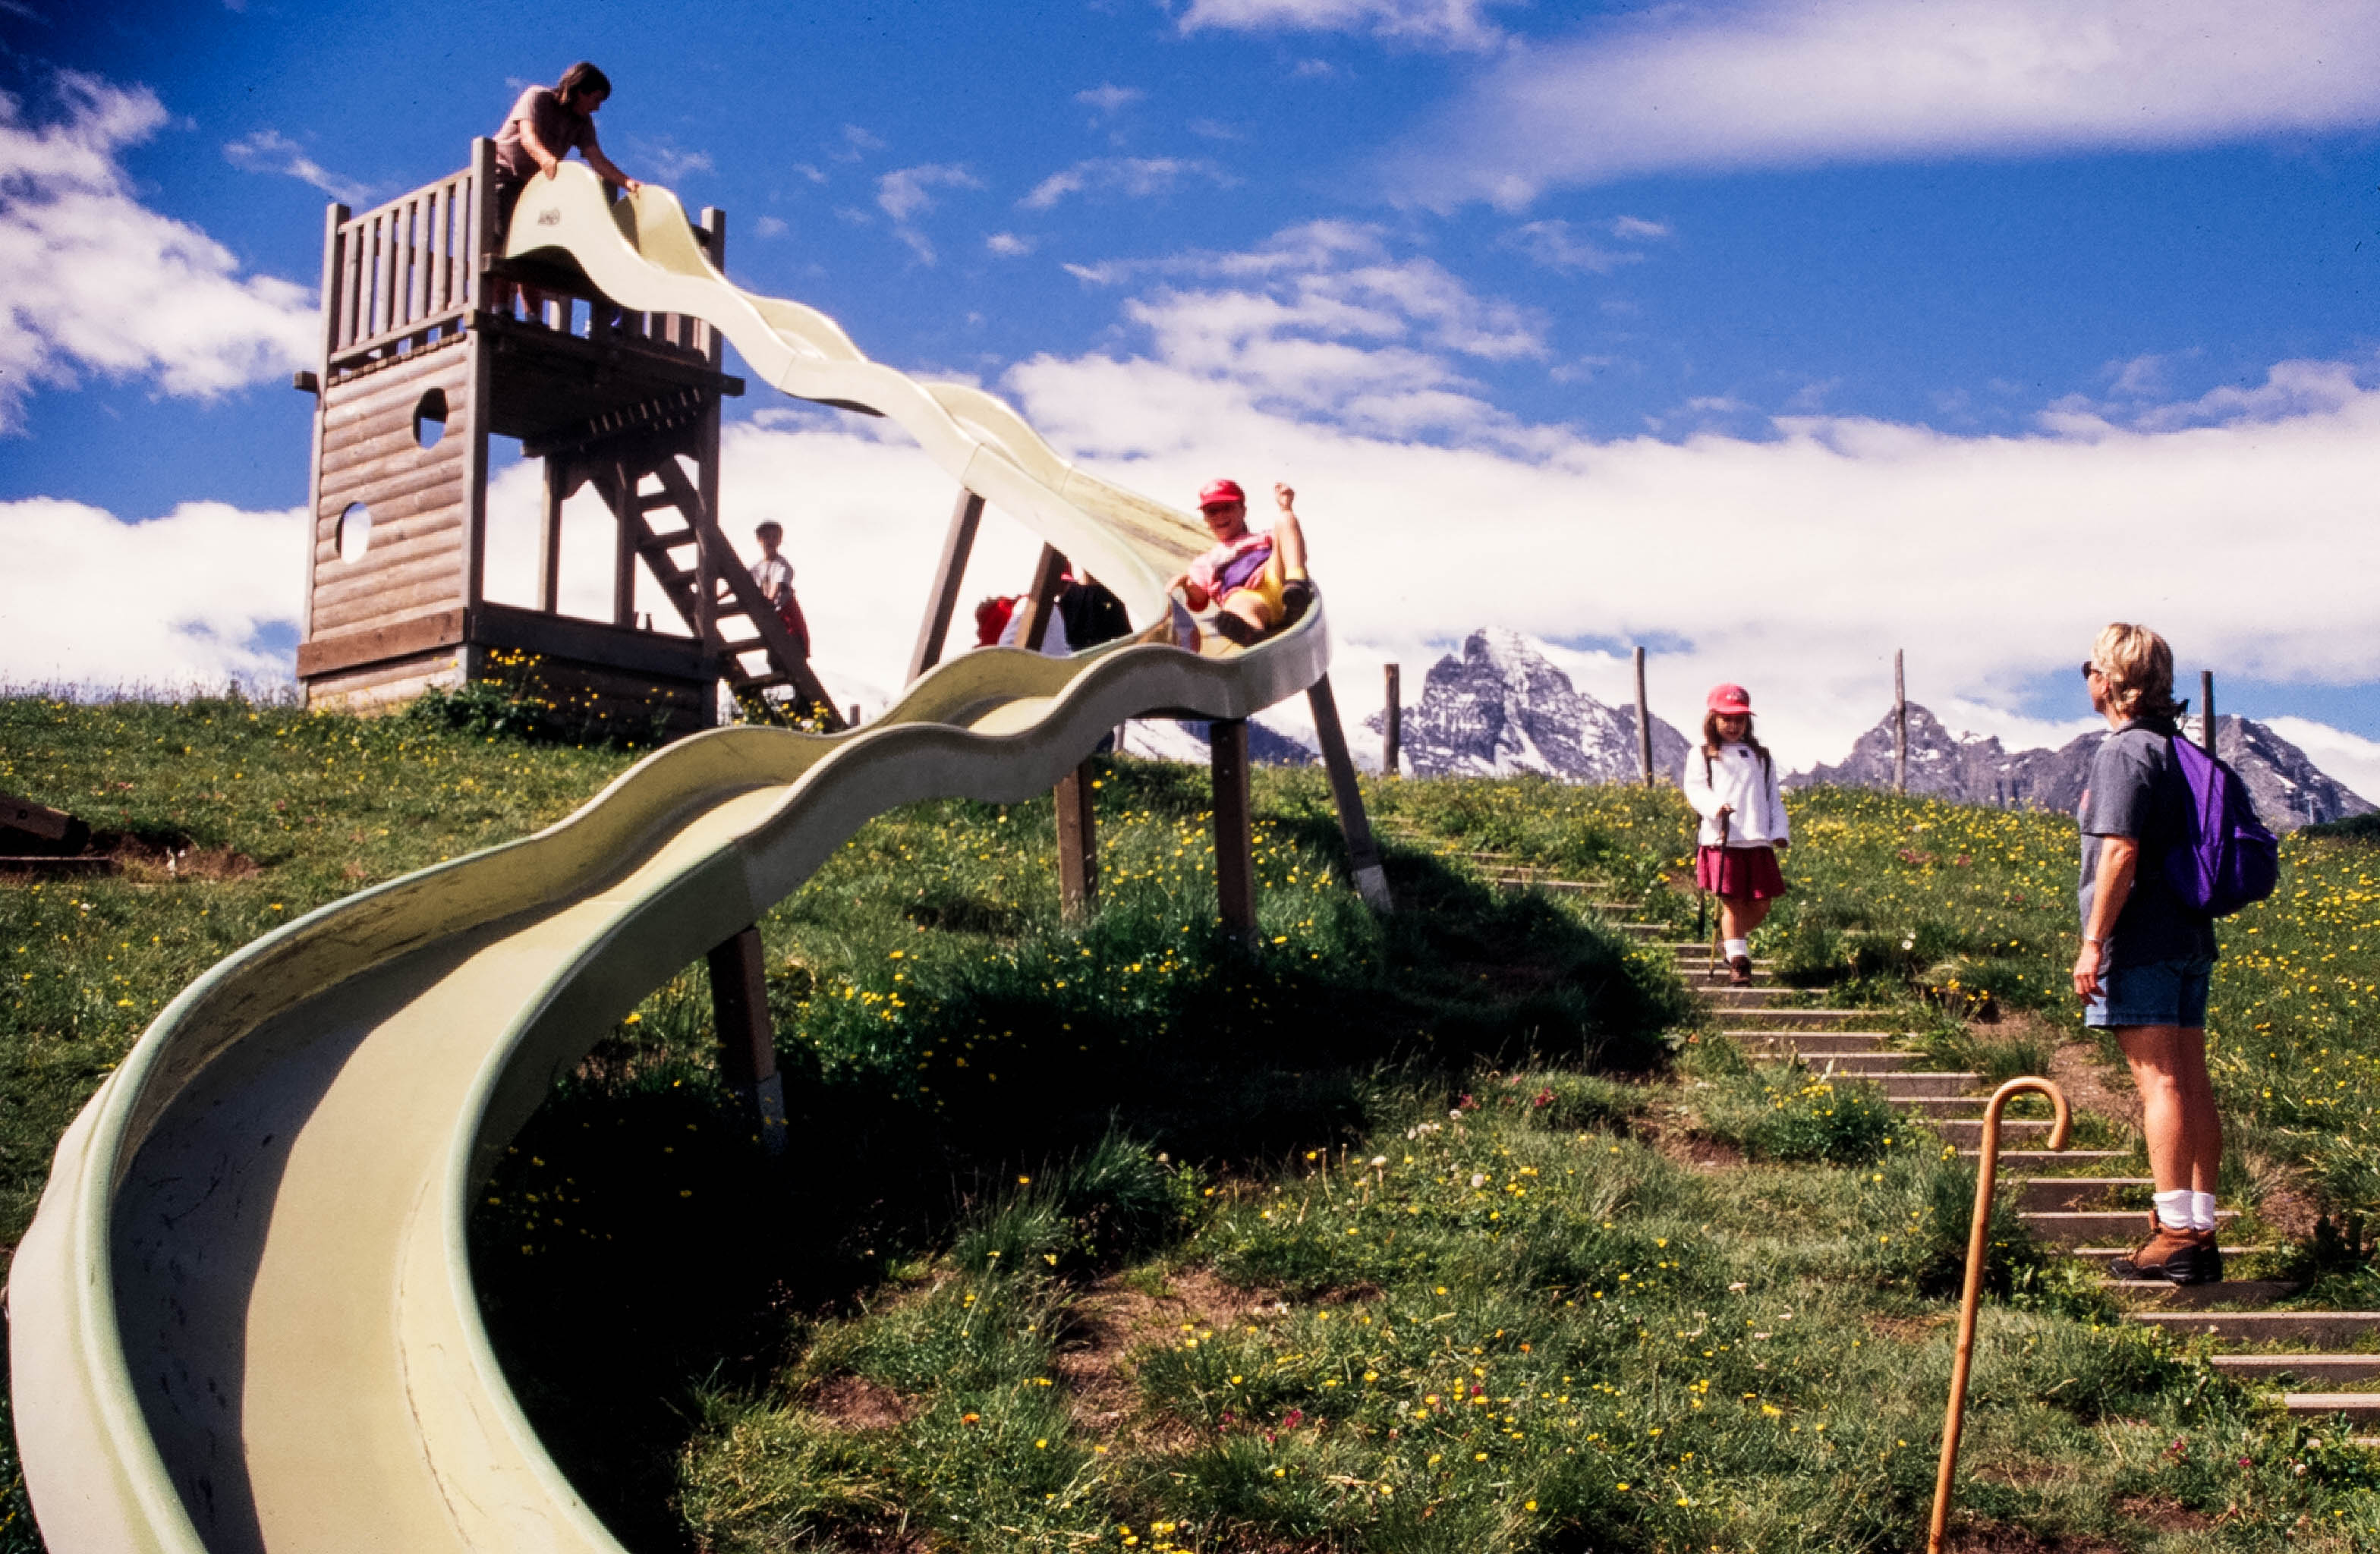 Kids playing on a playground in Switzerland, showing how traveling families pass down inherited wanderlust (image © Peter Boynton).